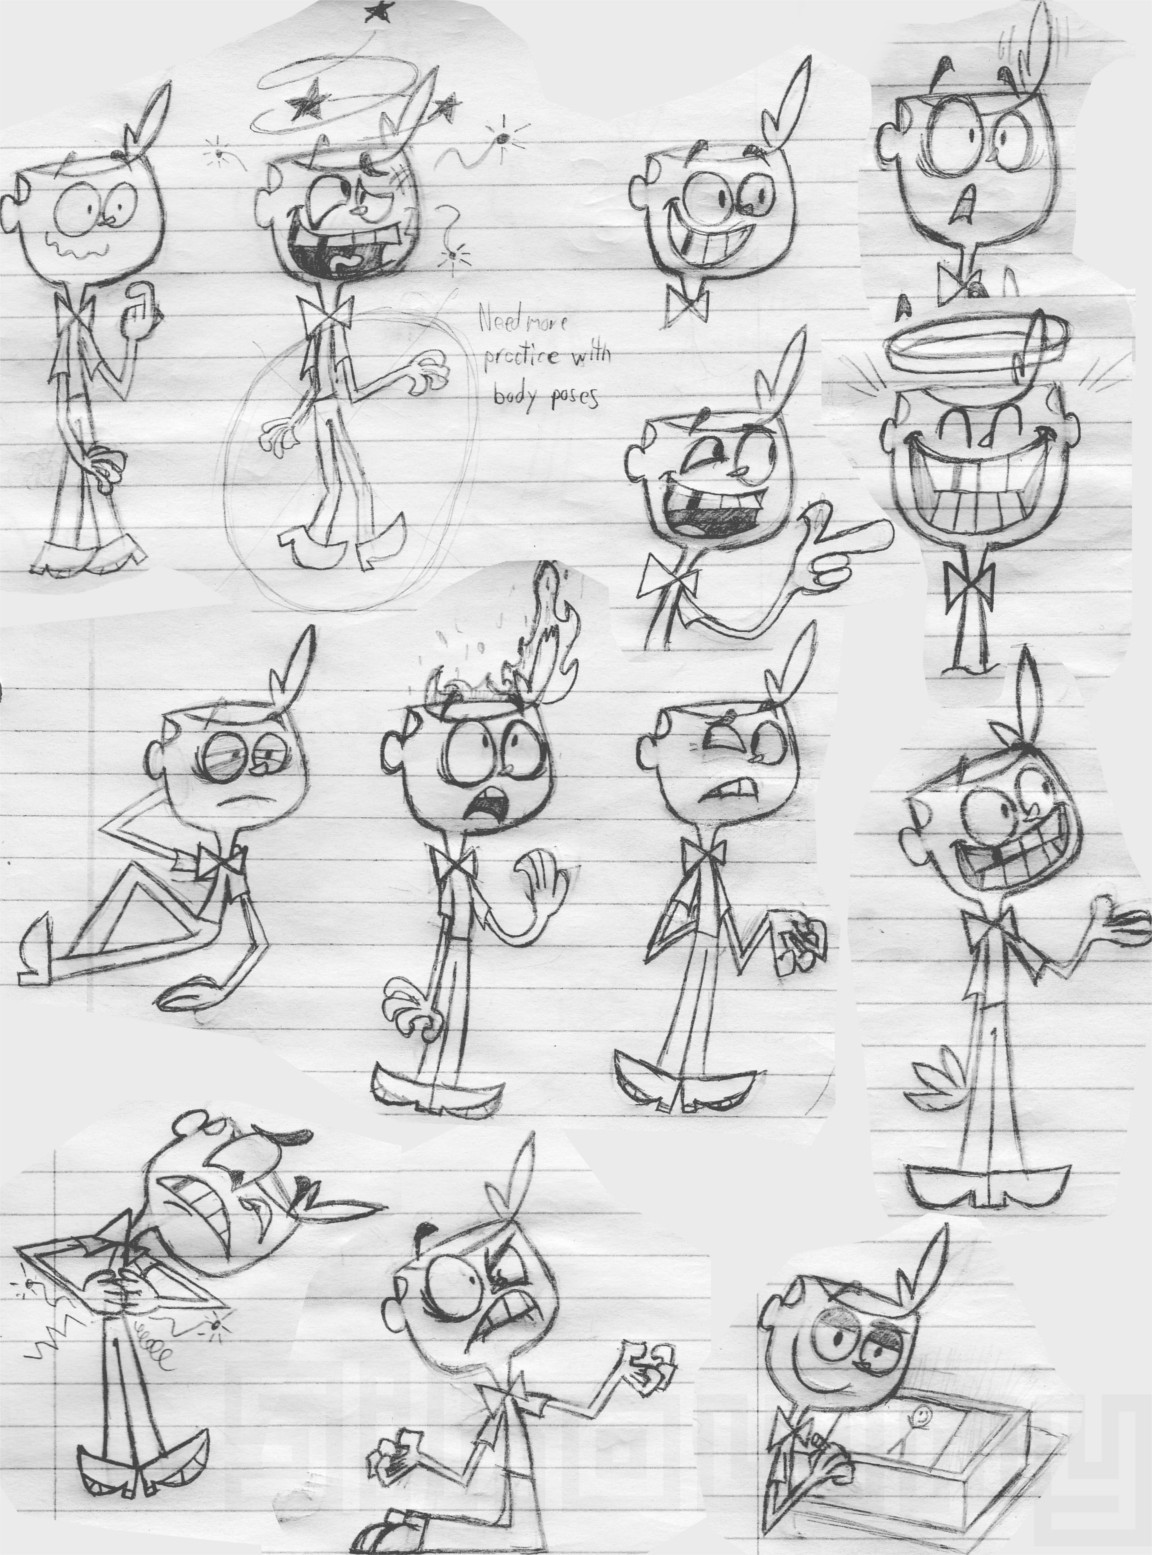 Sikowny - Old practice doodles of Jimmy on crappy paper in...